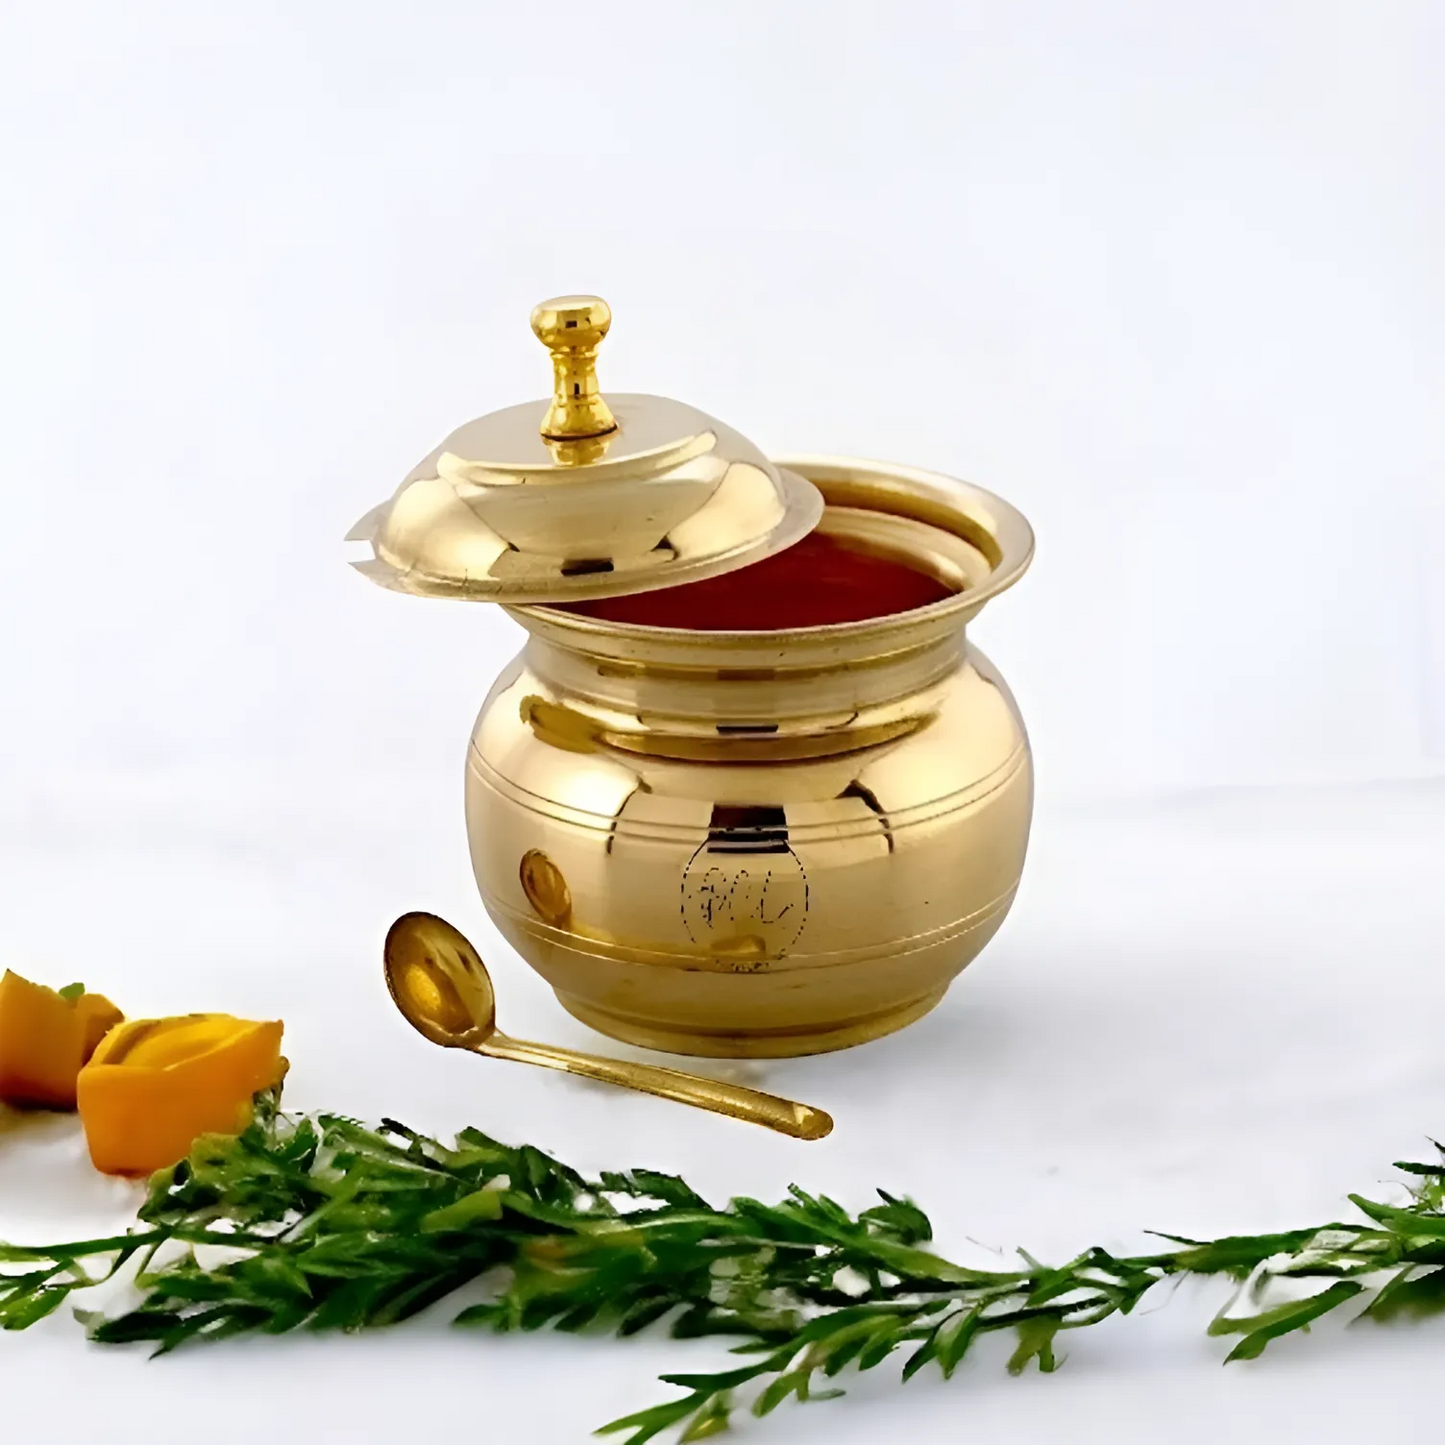 PCL Brass Ghee Pot 100% made up of pure brass with a classic look.